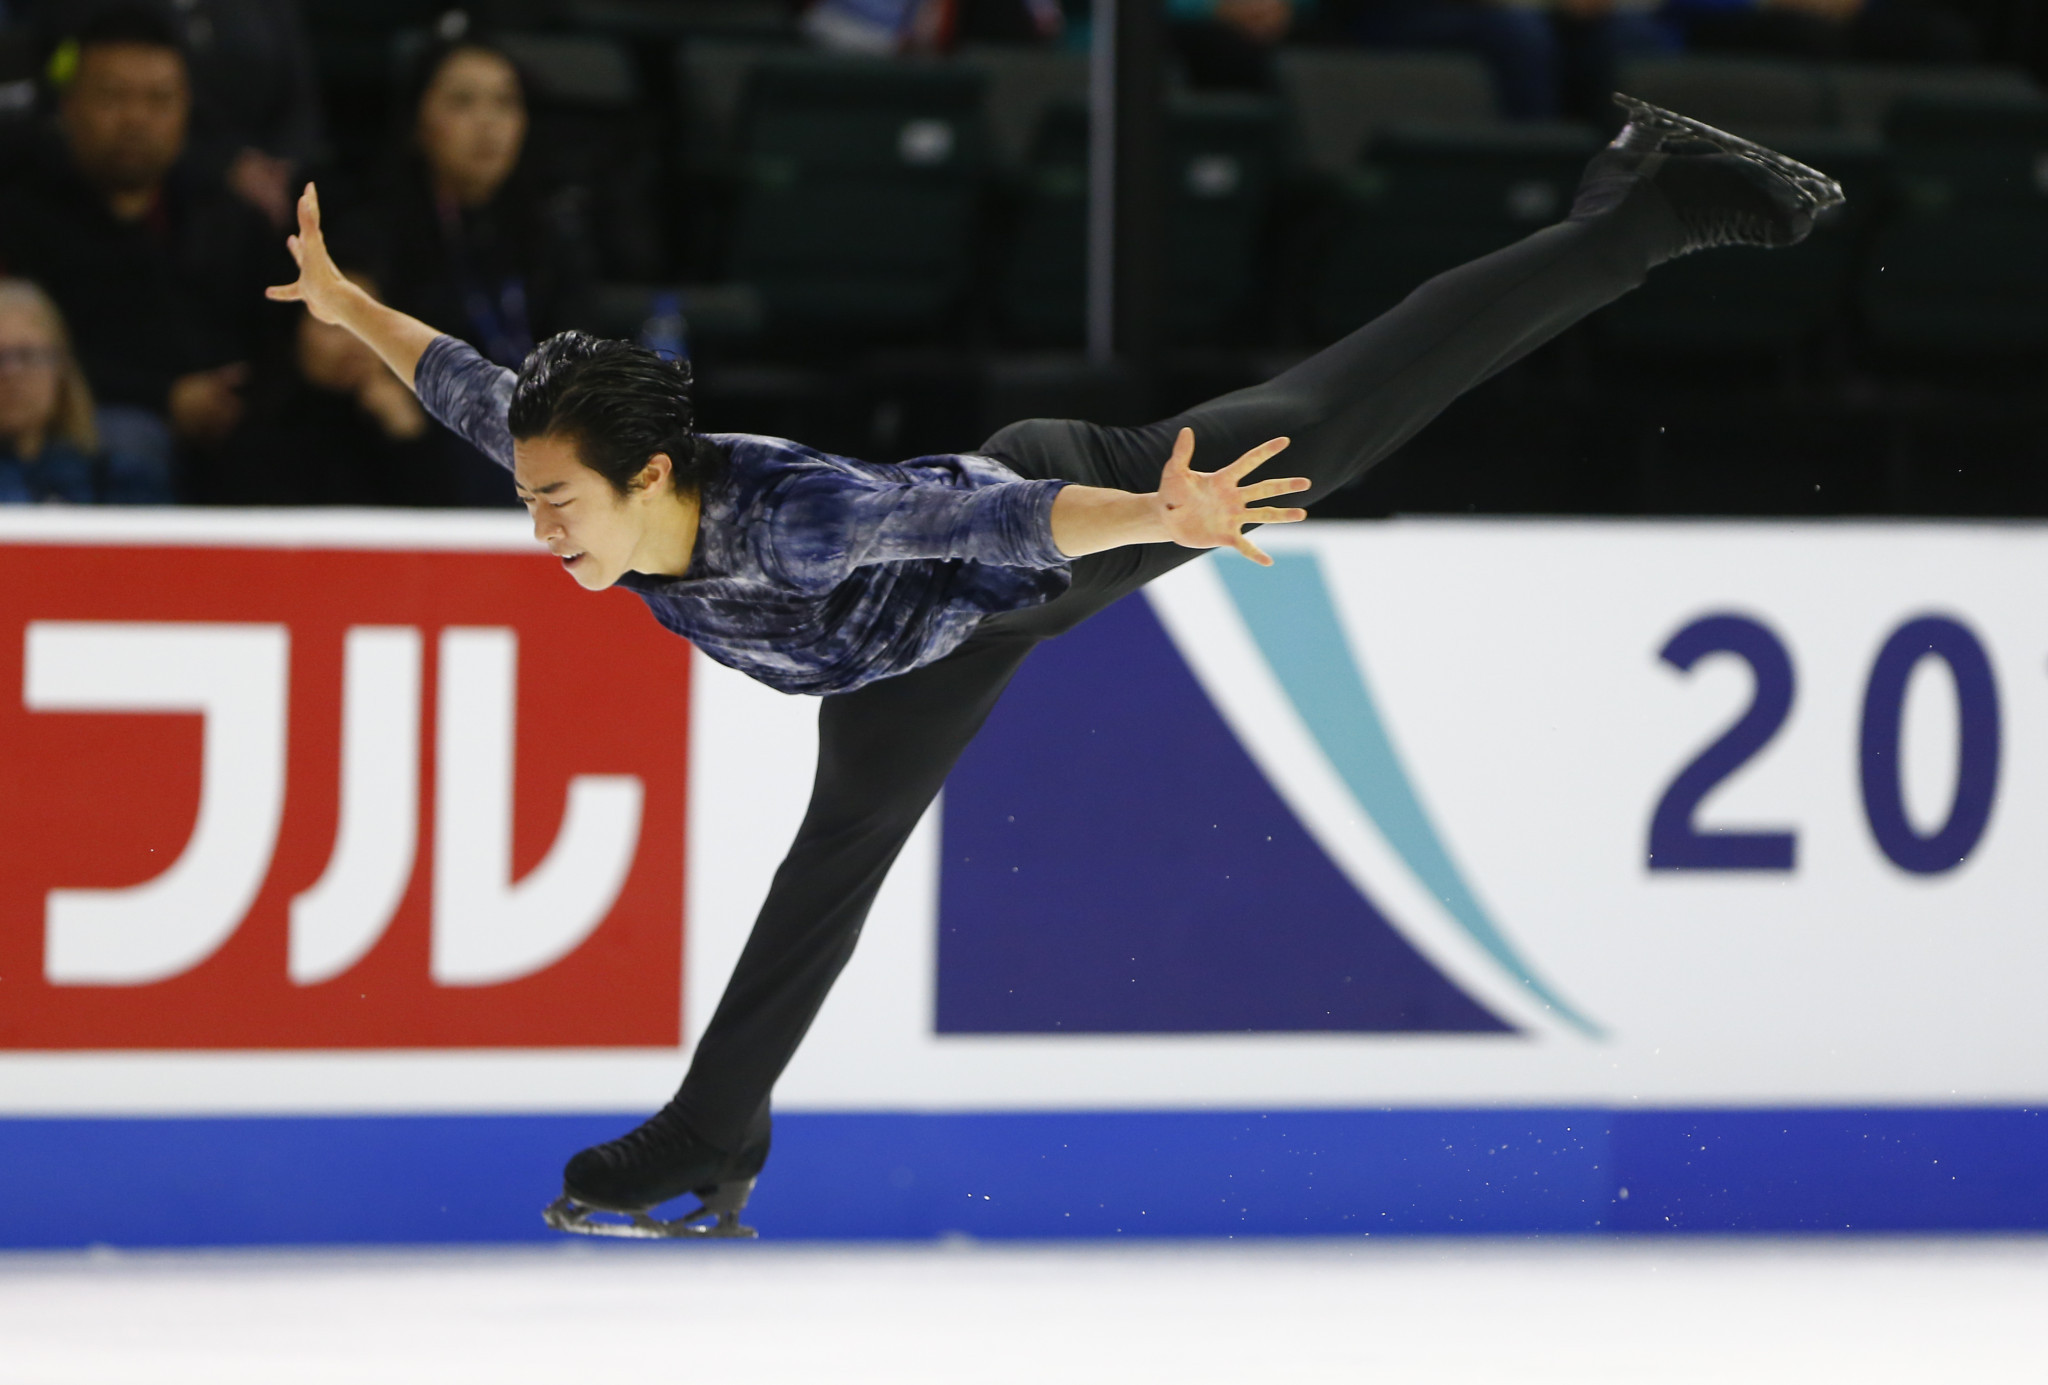 Nathan Chen wrapped up a comprehensive win at Skate America ©Getty Images